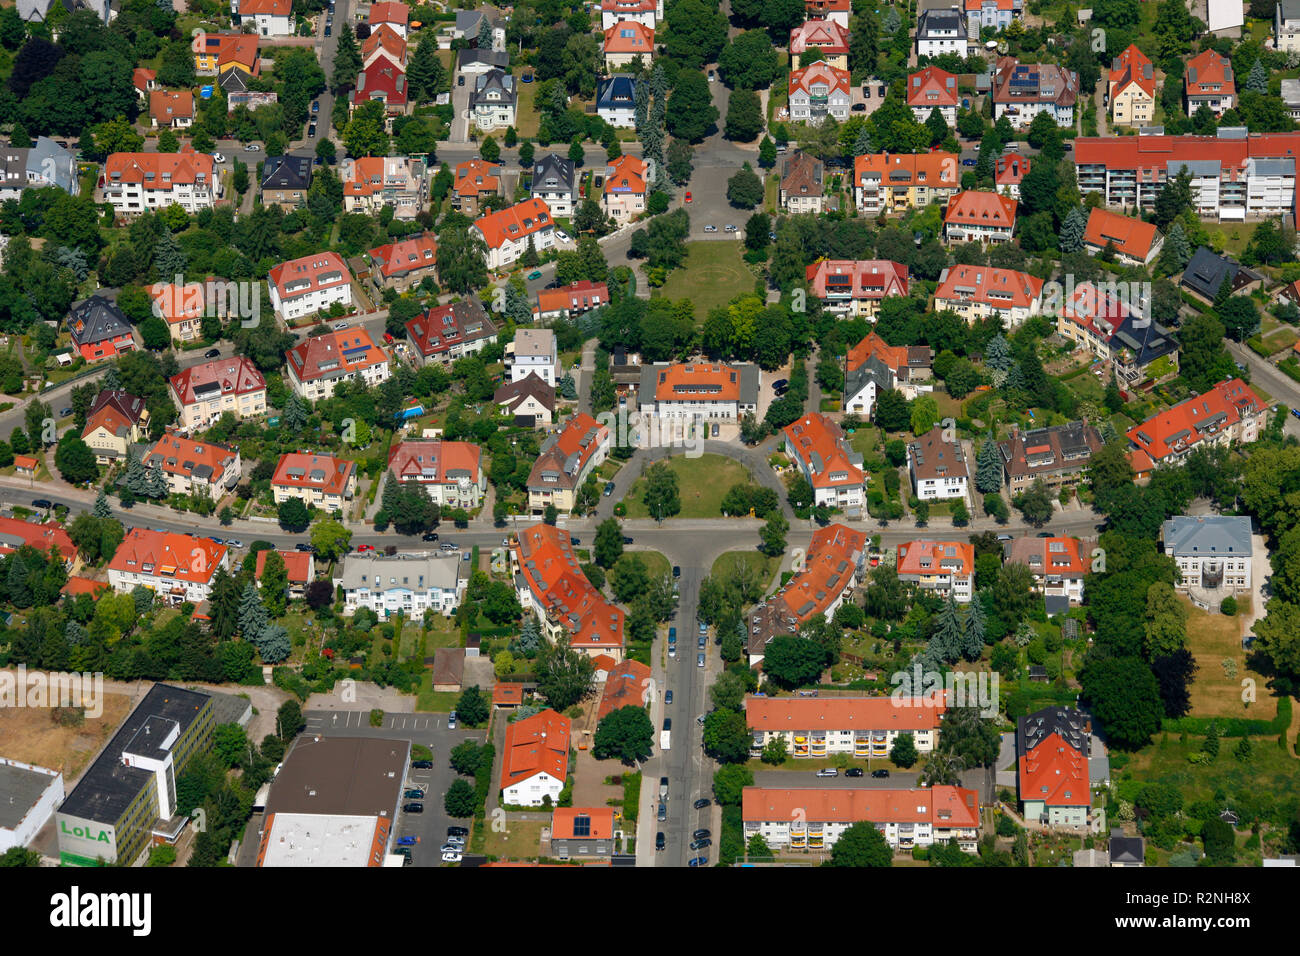 Aerial view, Arnstädter Hohle, Erfurt, Thuringia, Germany, Europe, Stock Photo